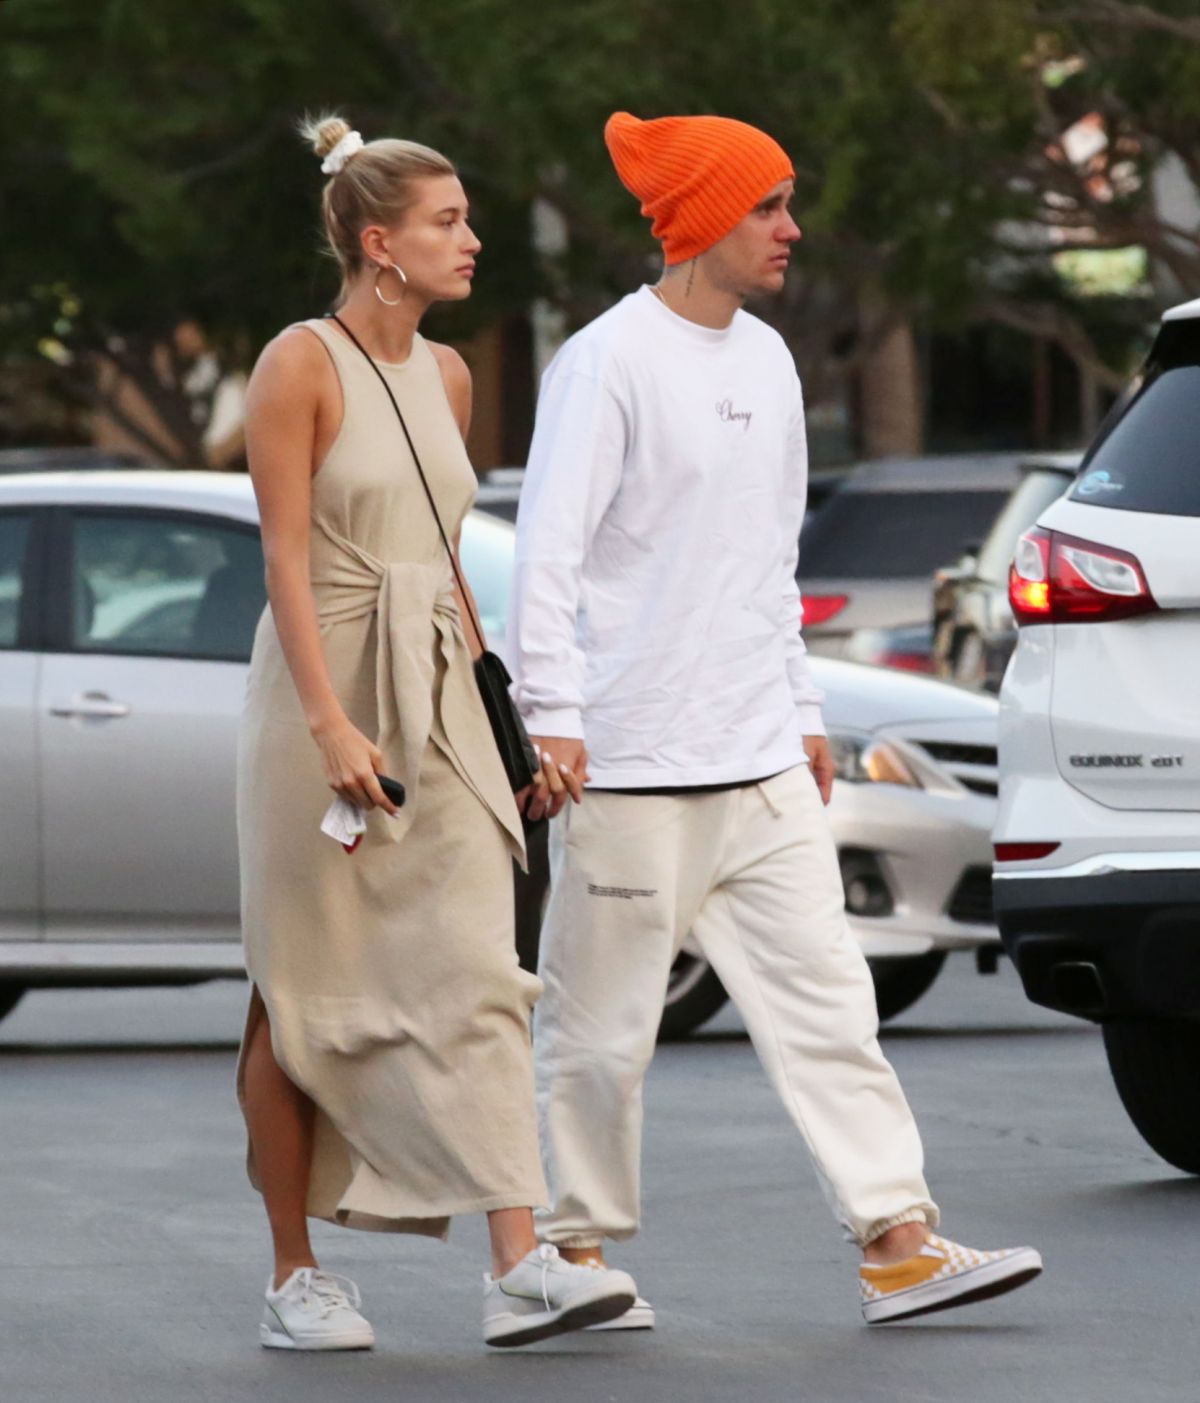 hailey-and-justin-bieber-out-in-los-angeles-03-30-2019-1.jpg